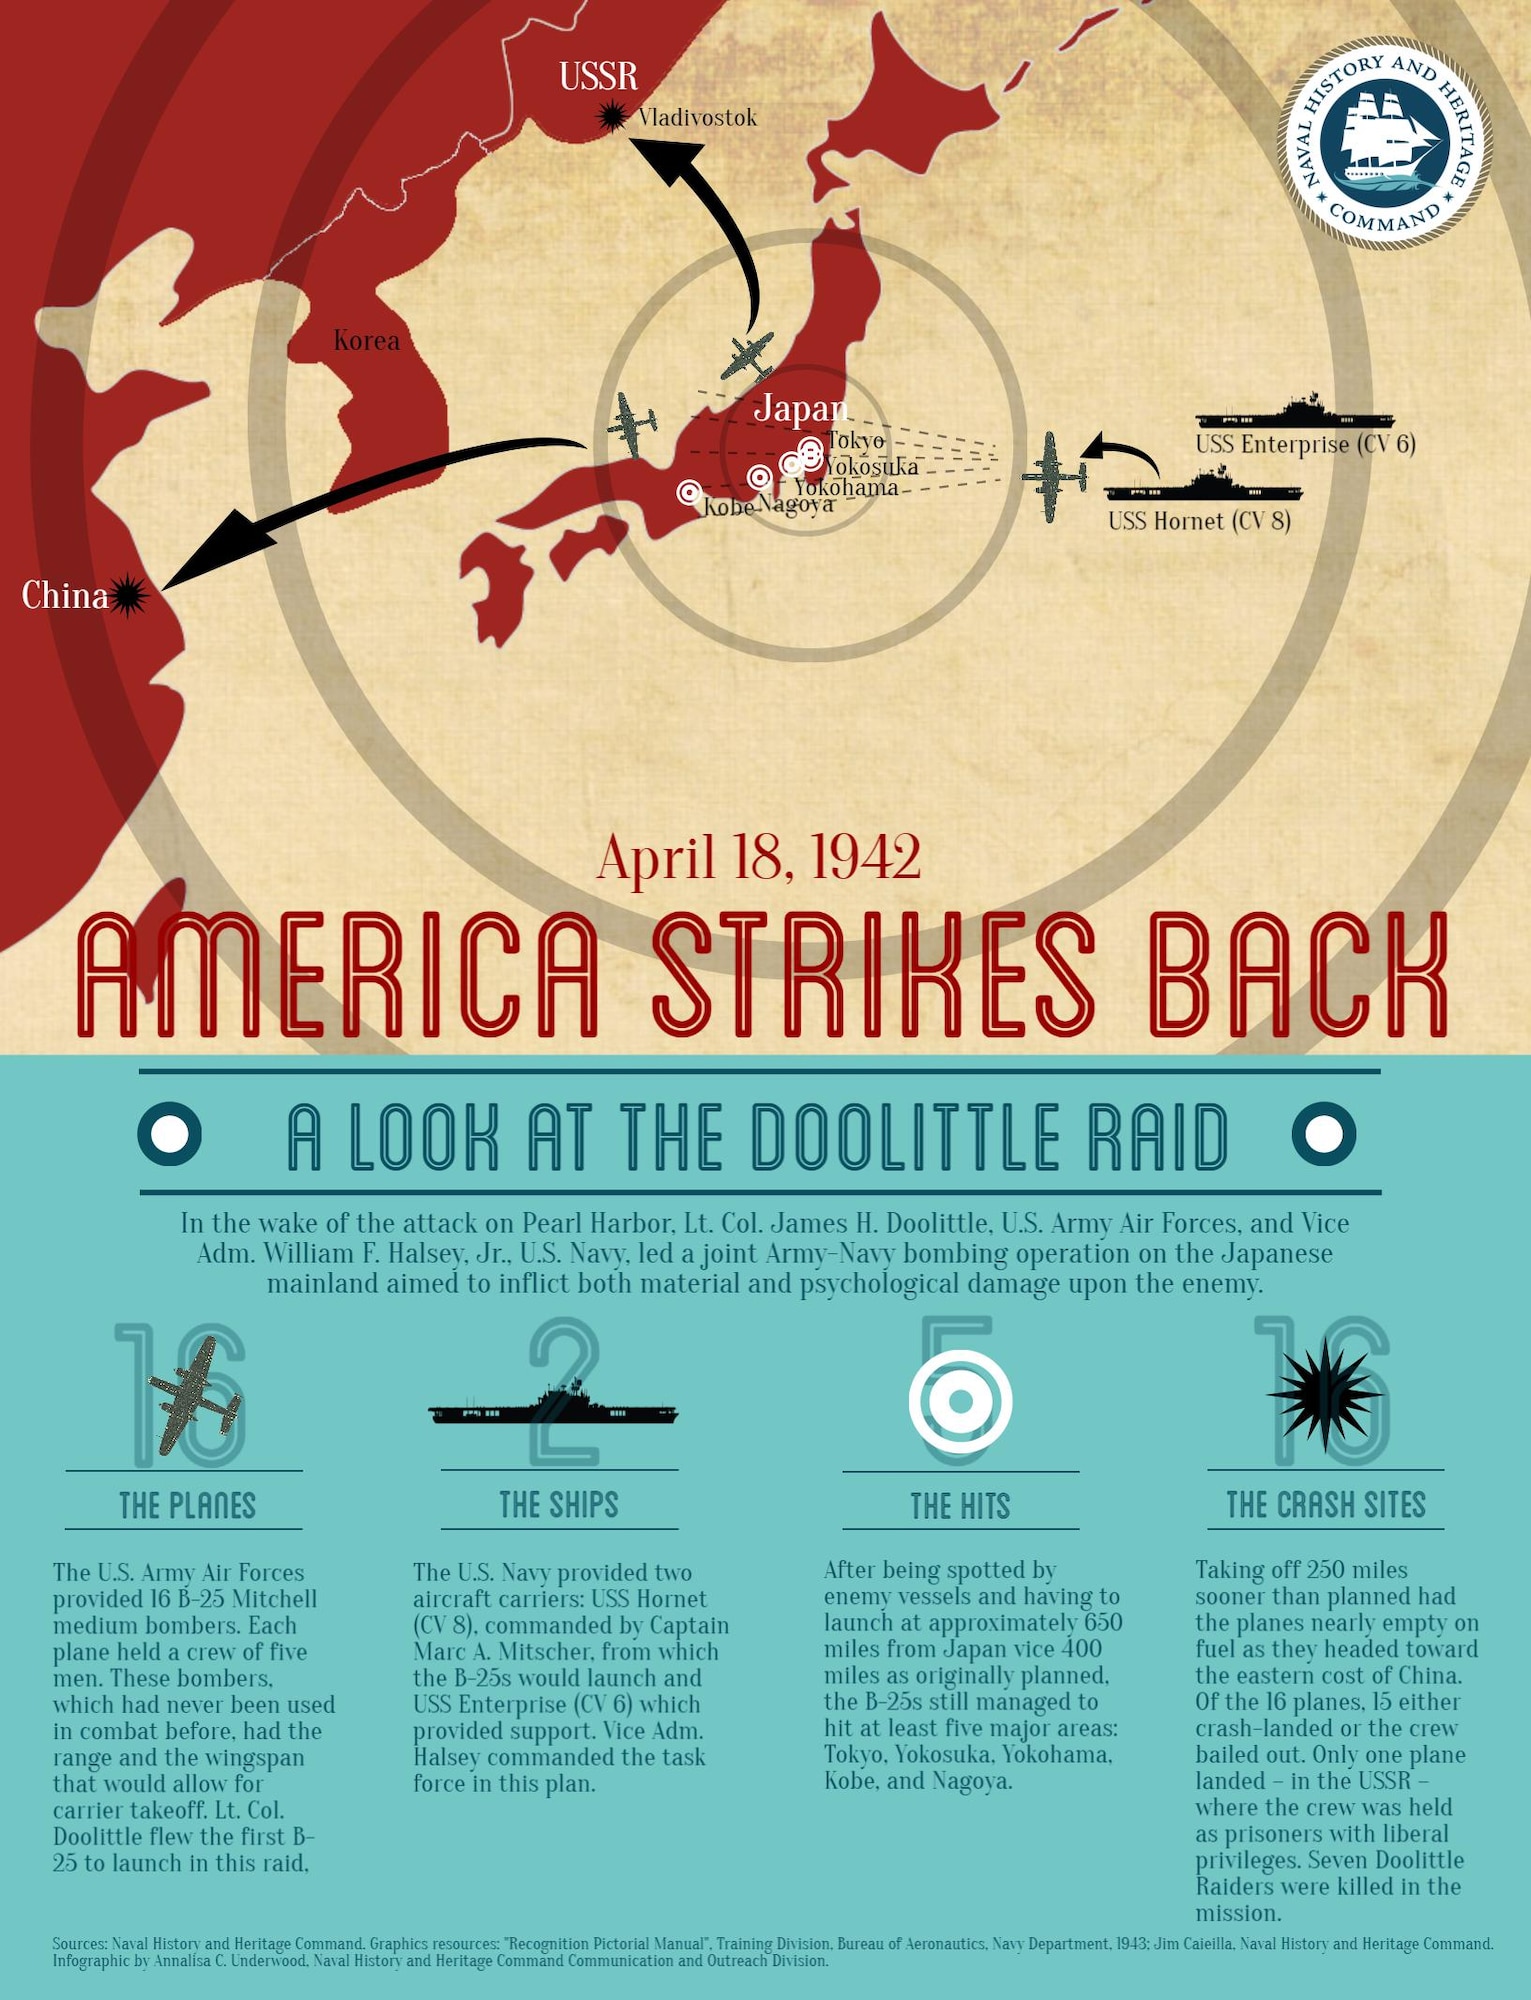 US Navy infographic America Strikes Back on the Doolittle Raid of April 18, 1942. (U.S. Navy graphic by Annalisa Underwood/Released, Naval History and Heritage Command)